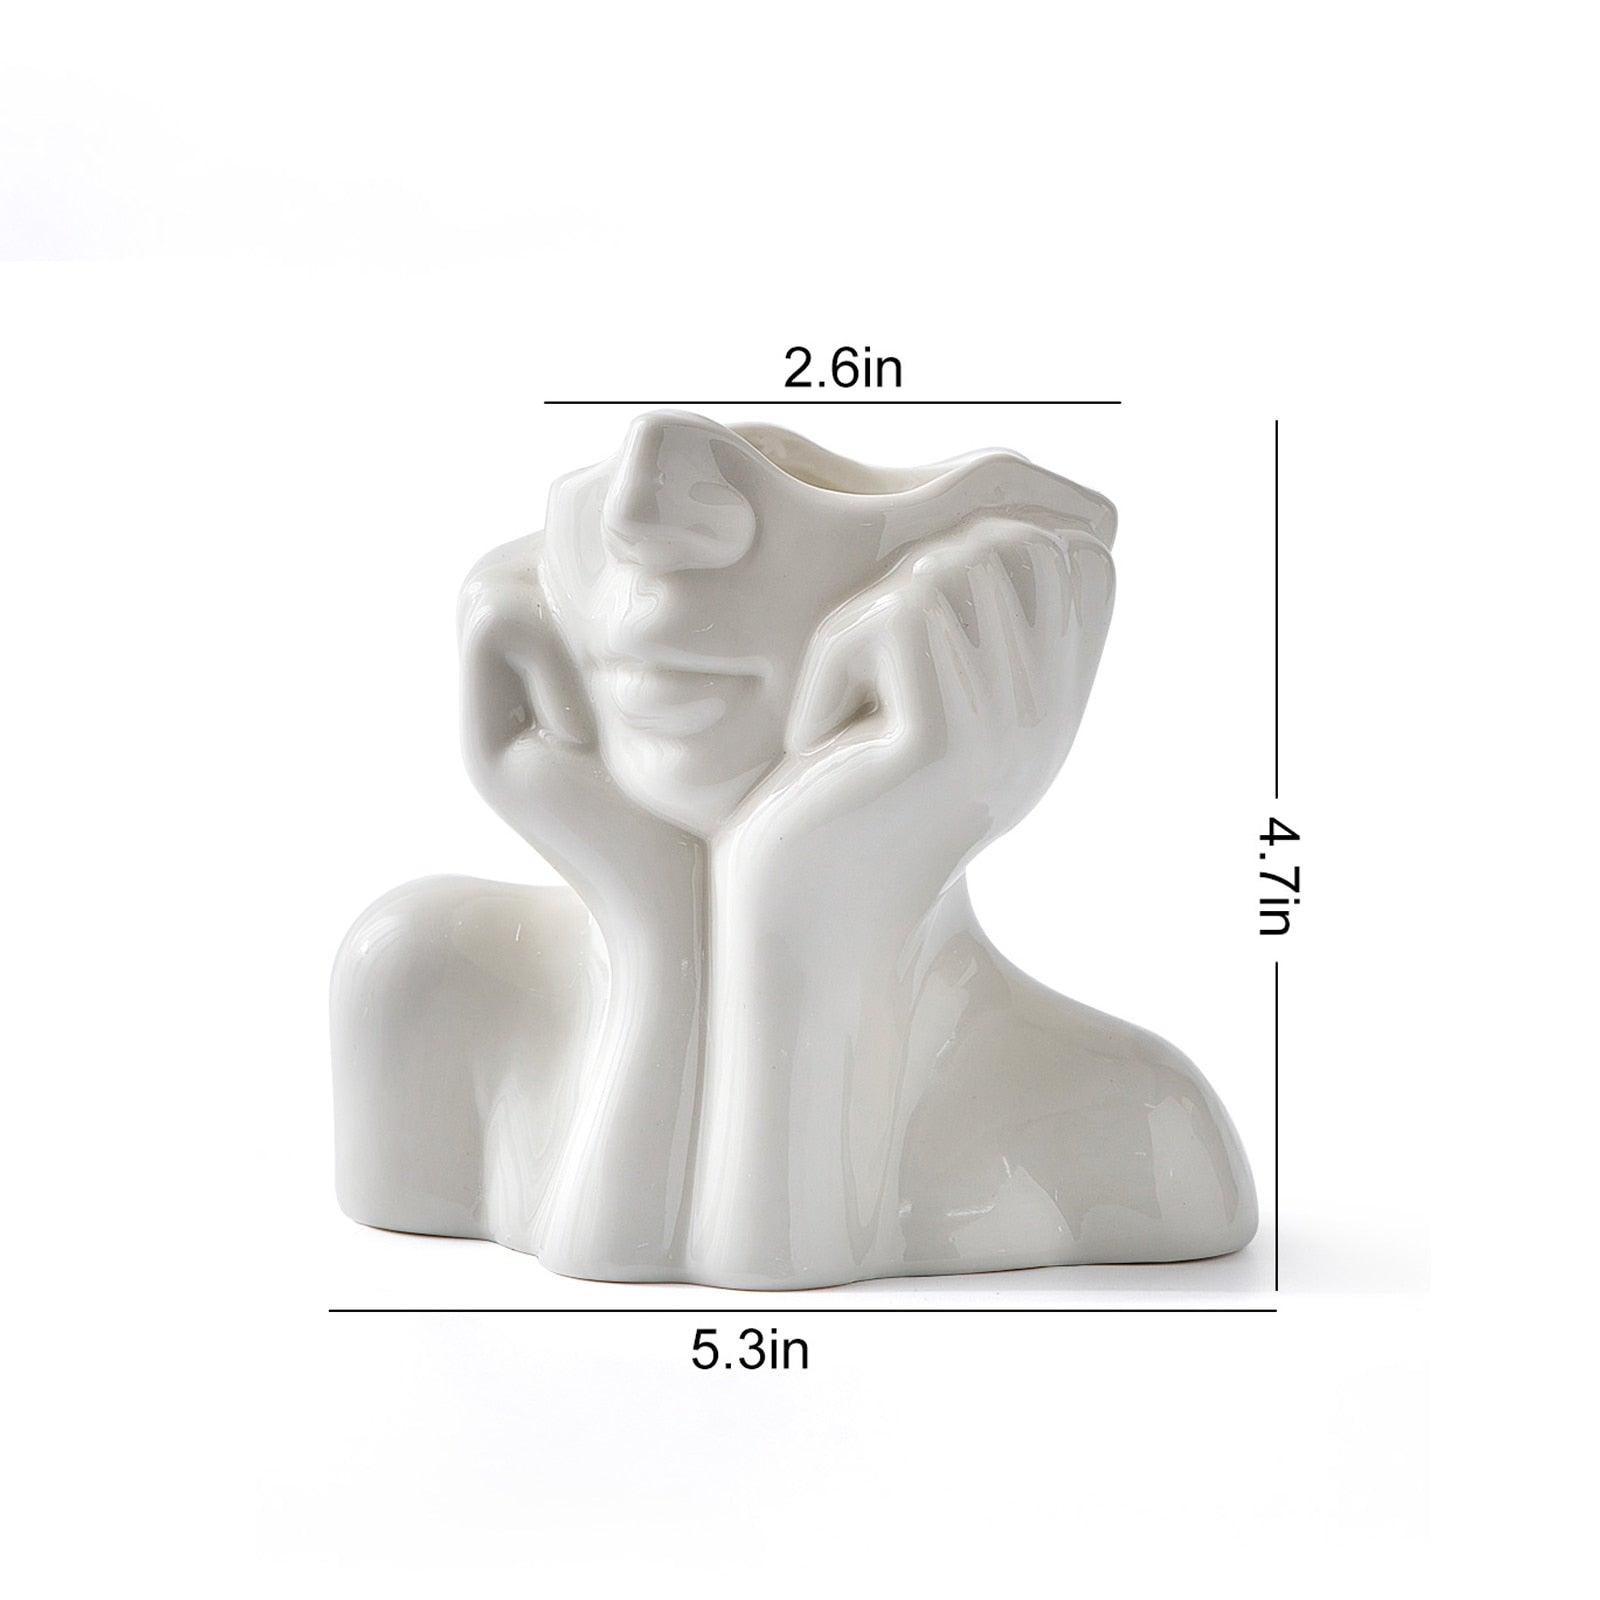 Shop 0 Height 12cm 4.7in Decoration desk accessories human face statue ceramic vase figurines for interior Figurine room decor statues and sculptures Mademoiselle Home Decor